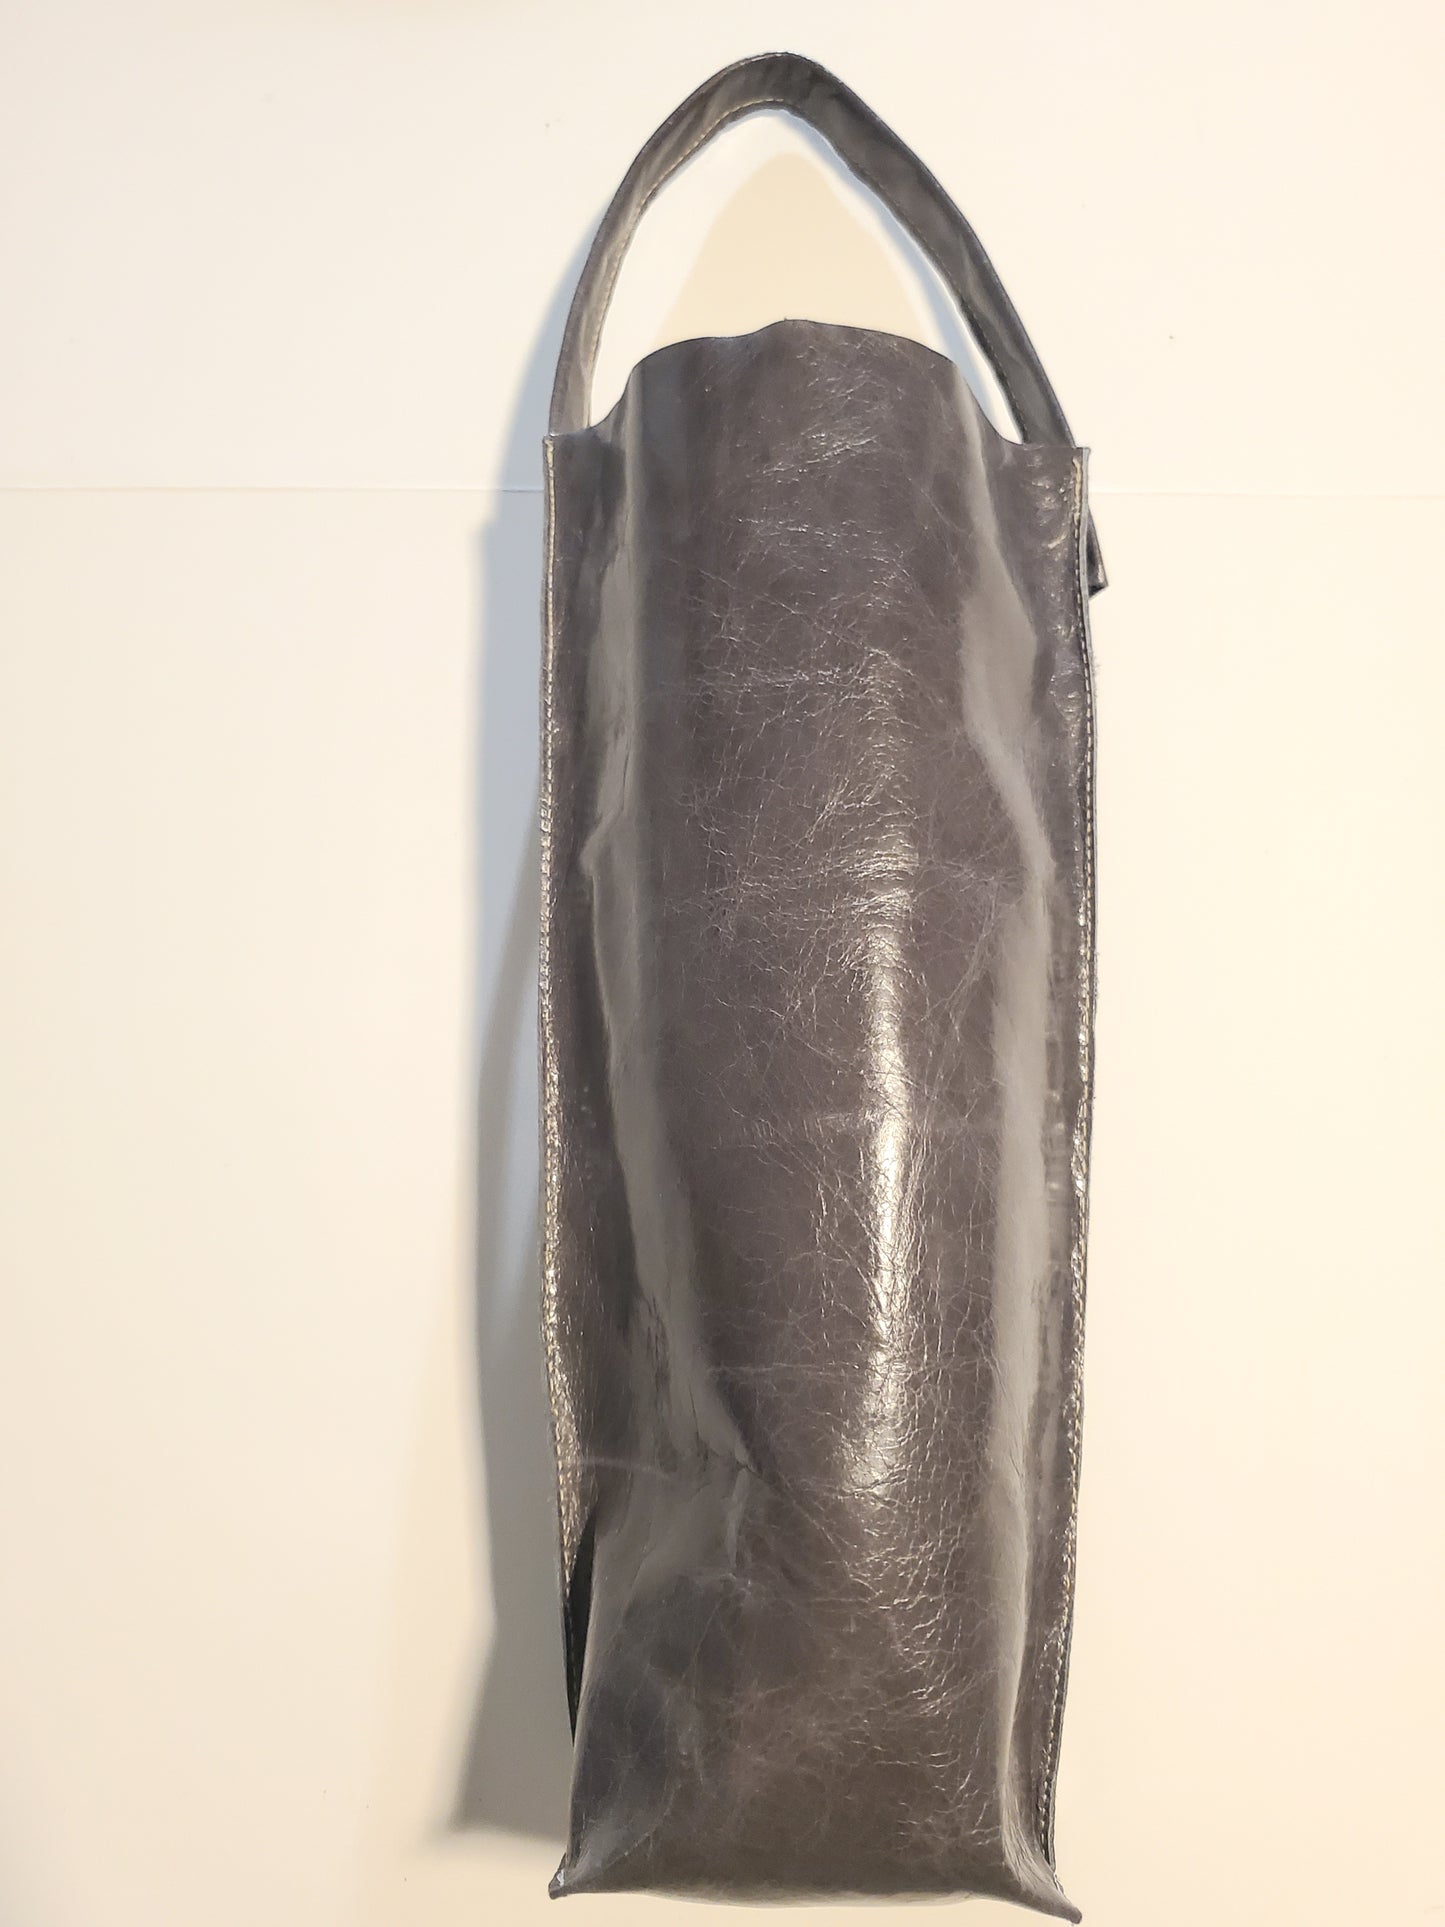 Gray leather wine bag made in LA